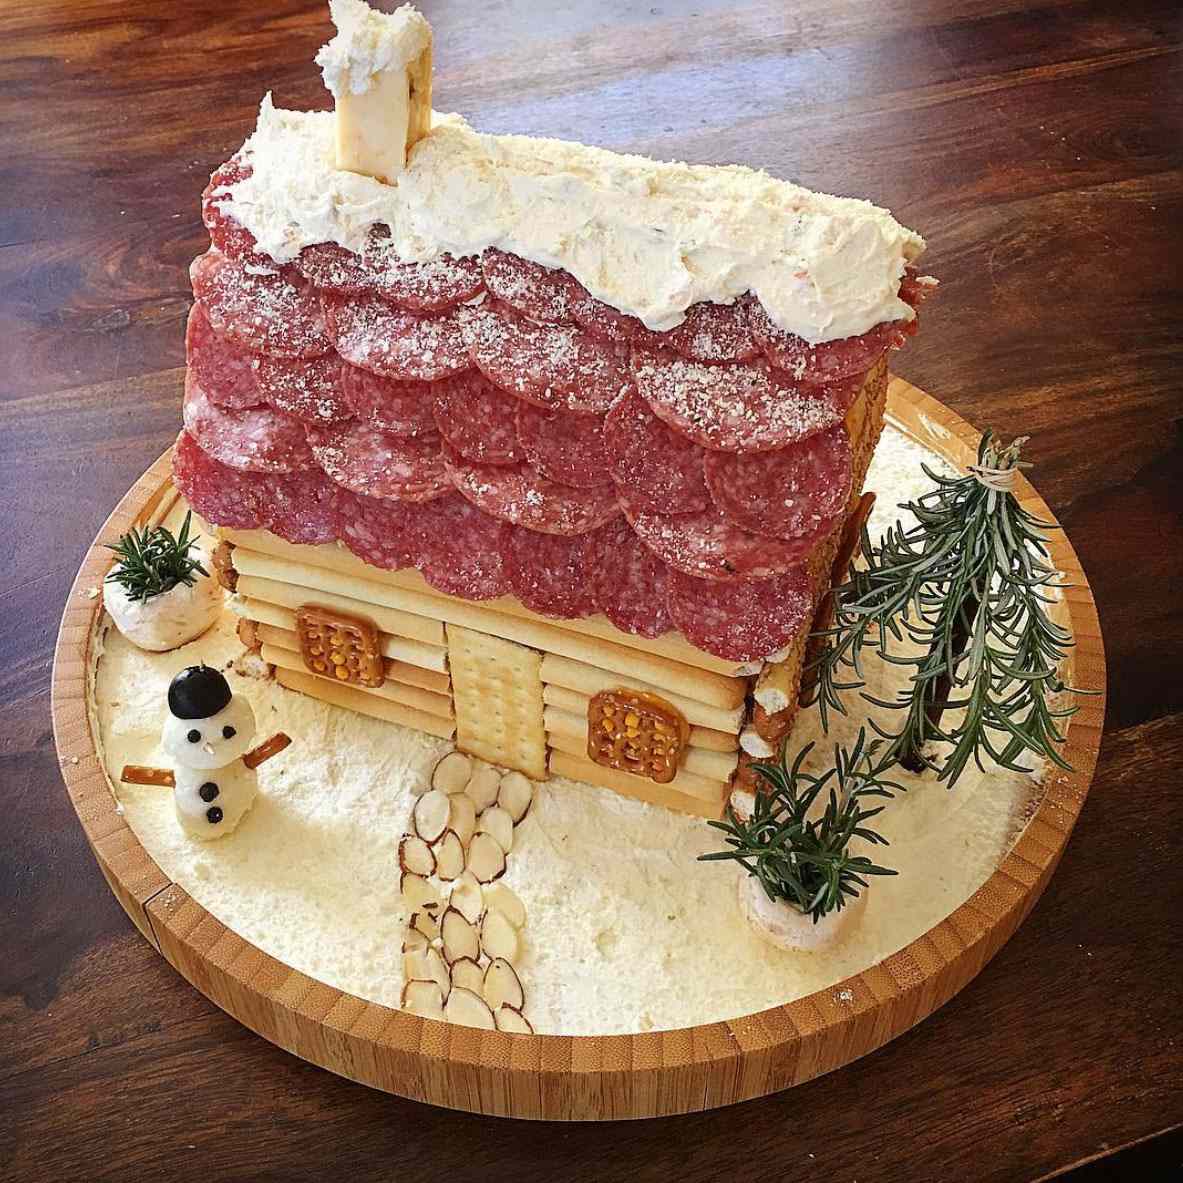 Charcuterie Houses Are This Year's Most Festive Holiday Treat